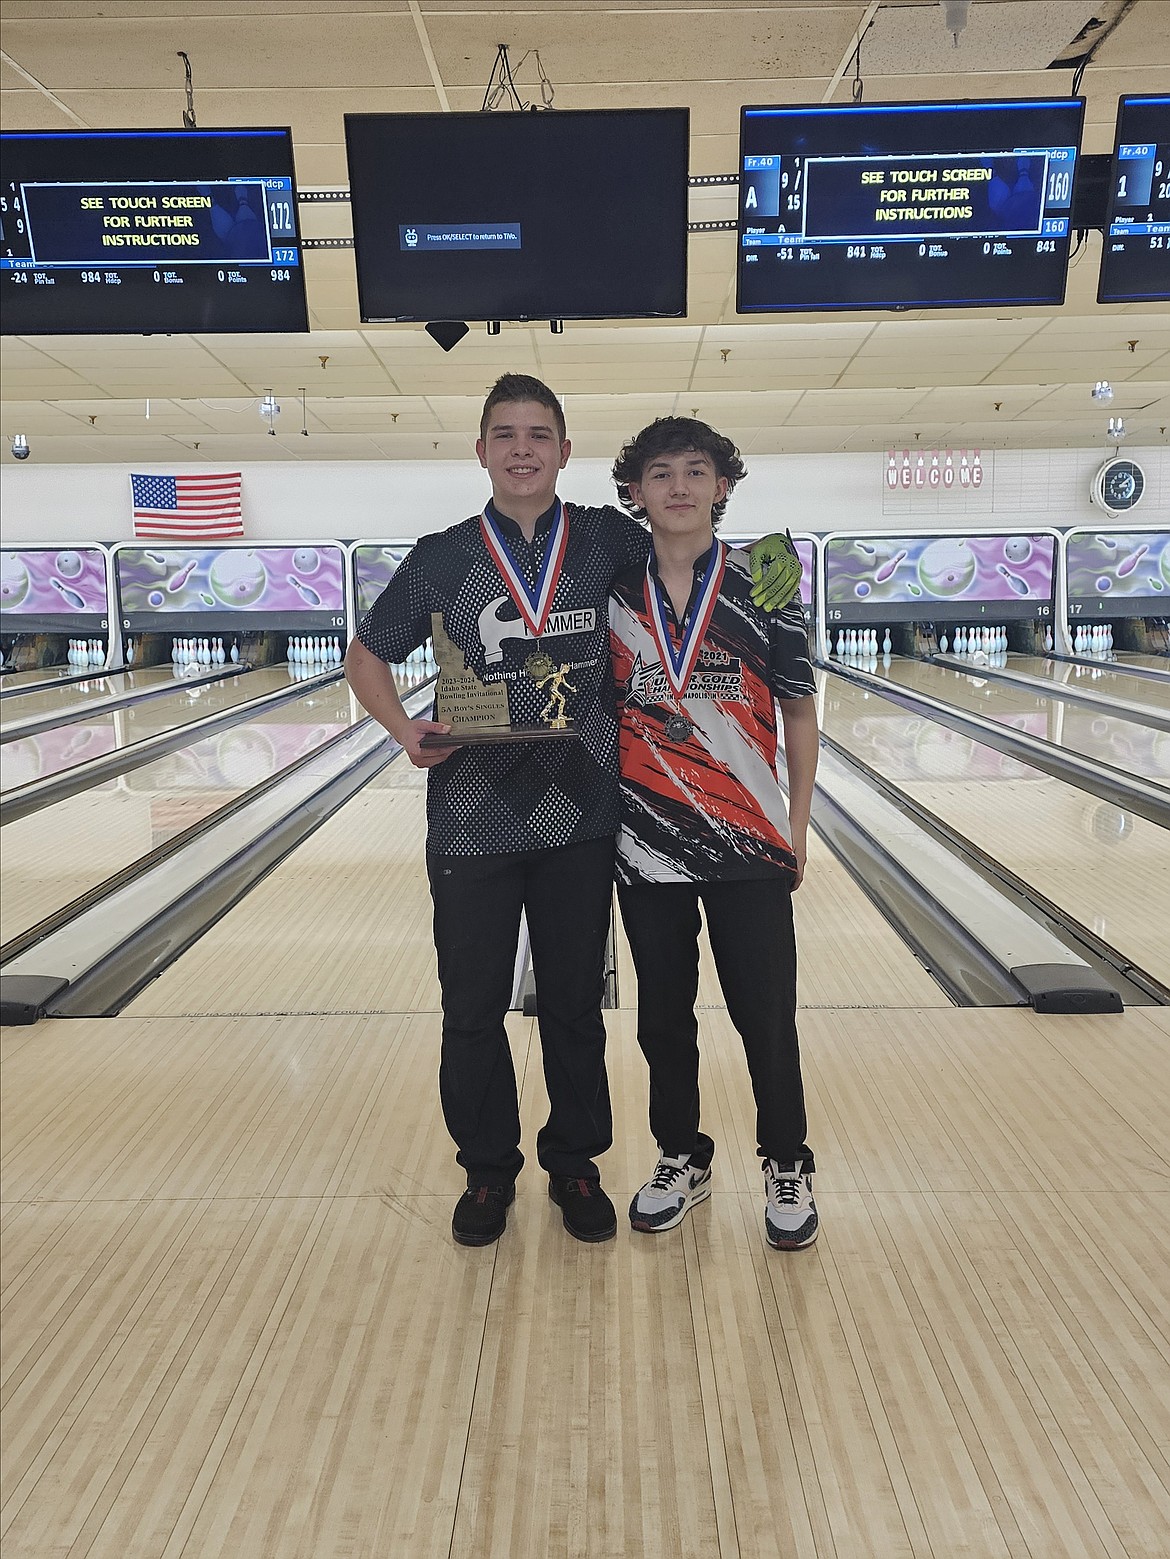 Courtesy photo
Tyler Clarke, left, of Lake City won his second straight state title at the state high school bowling championships Feb. 20-21 in Burley and Twin Falls. At right is Donny Shaw of Post Falls High, who placed second.